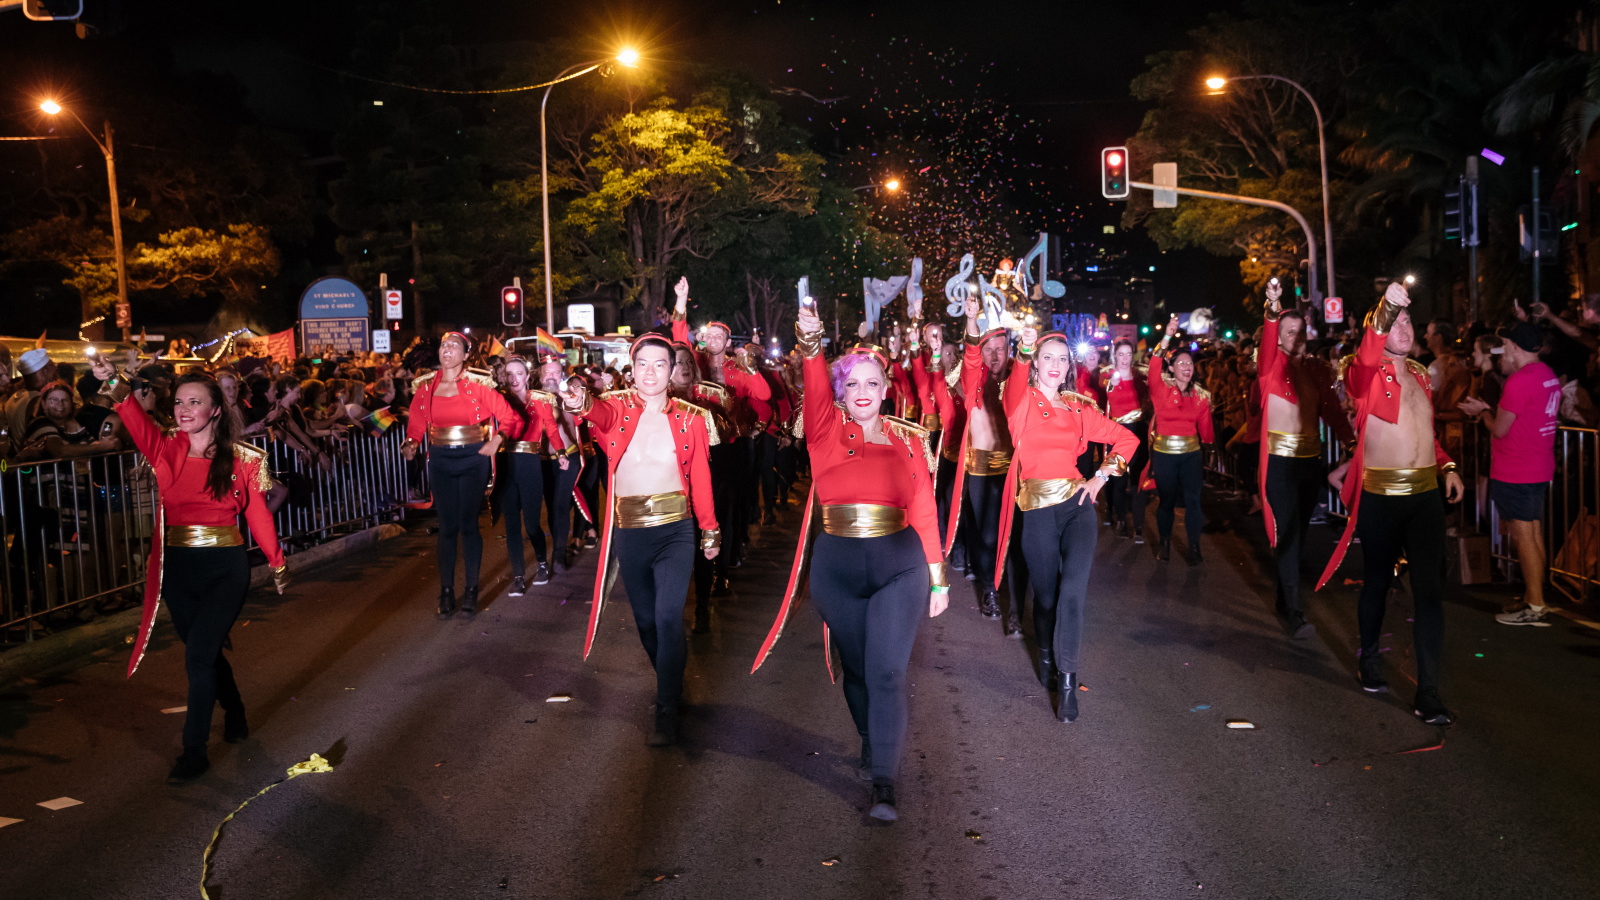 People marching in the street, dressed in red jackets and a gold belt.